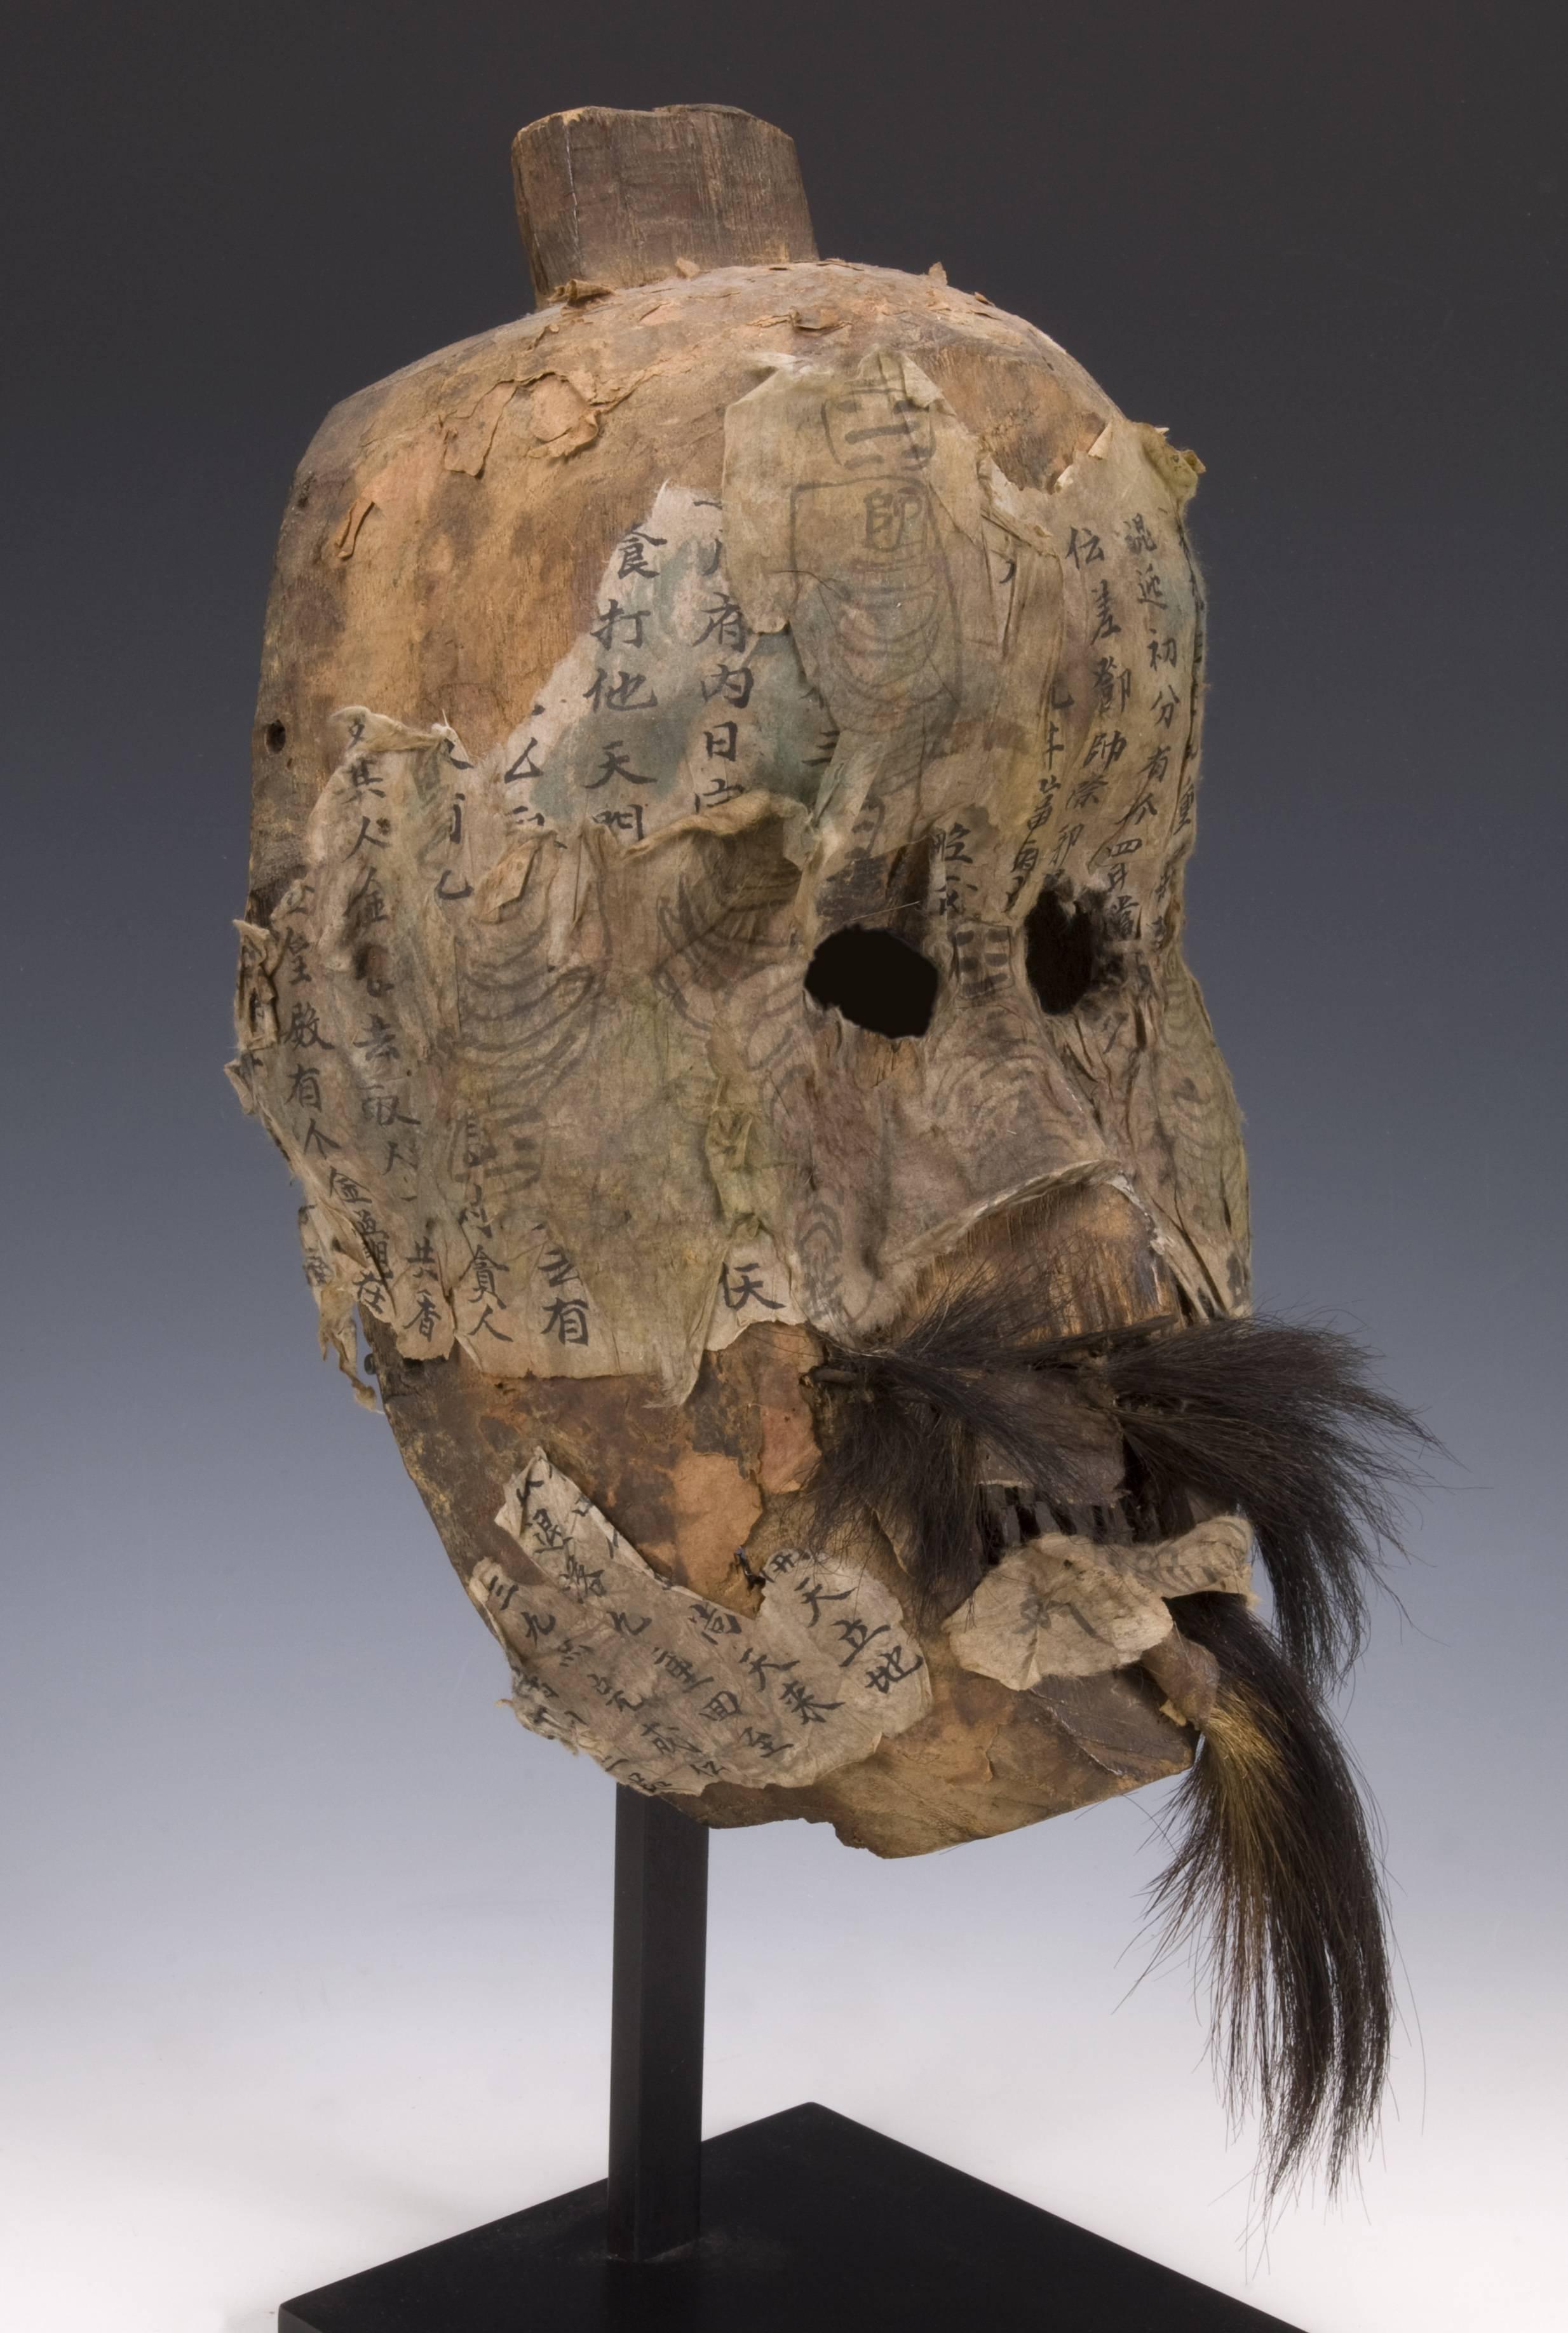 Offered by ANDRES MORAGA
Yao Shaman's Mask
Guizhou Province, China
Late 19th or early 20th century
Covered inside and out with printed and handwritten protective prayers
It comes on a custom steel stand.